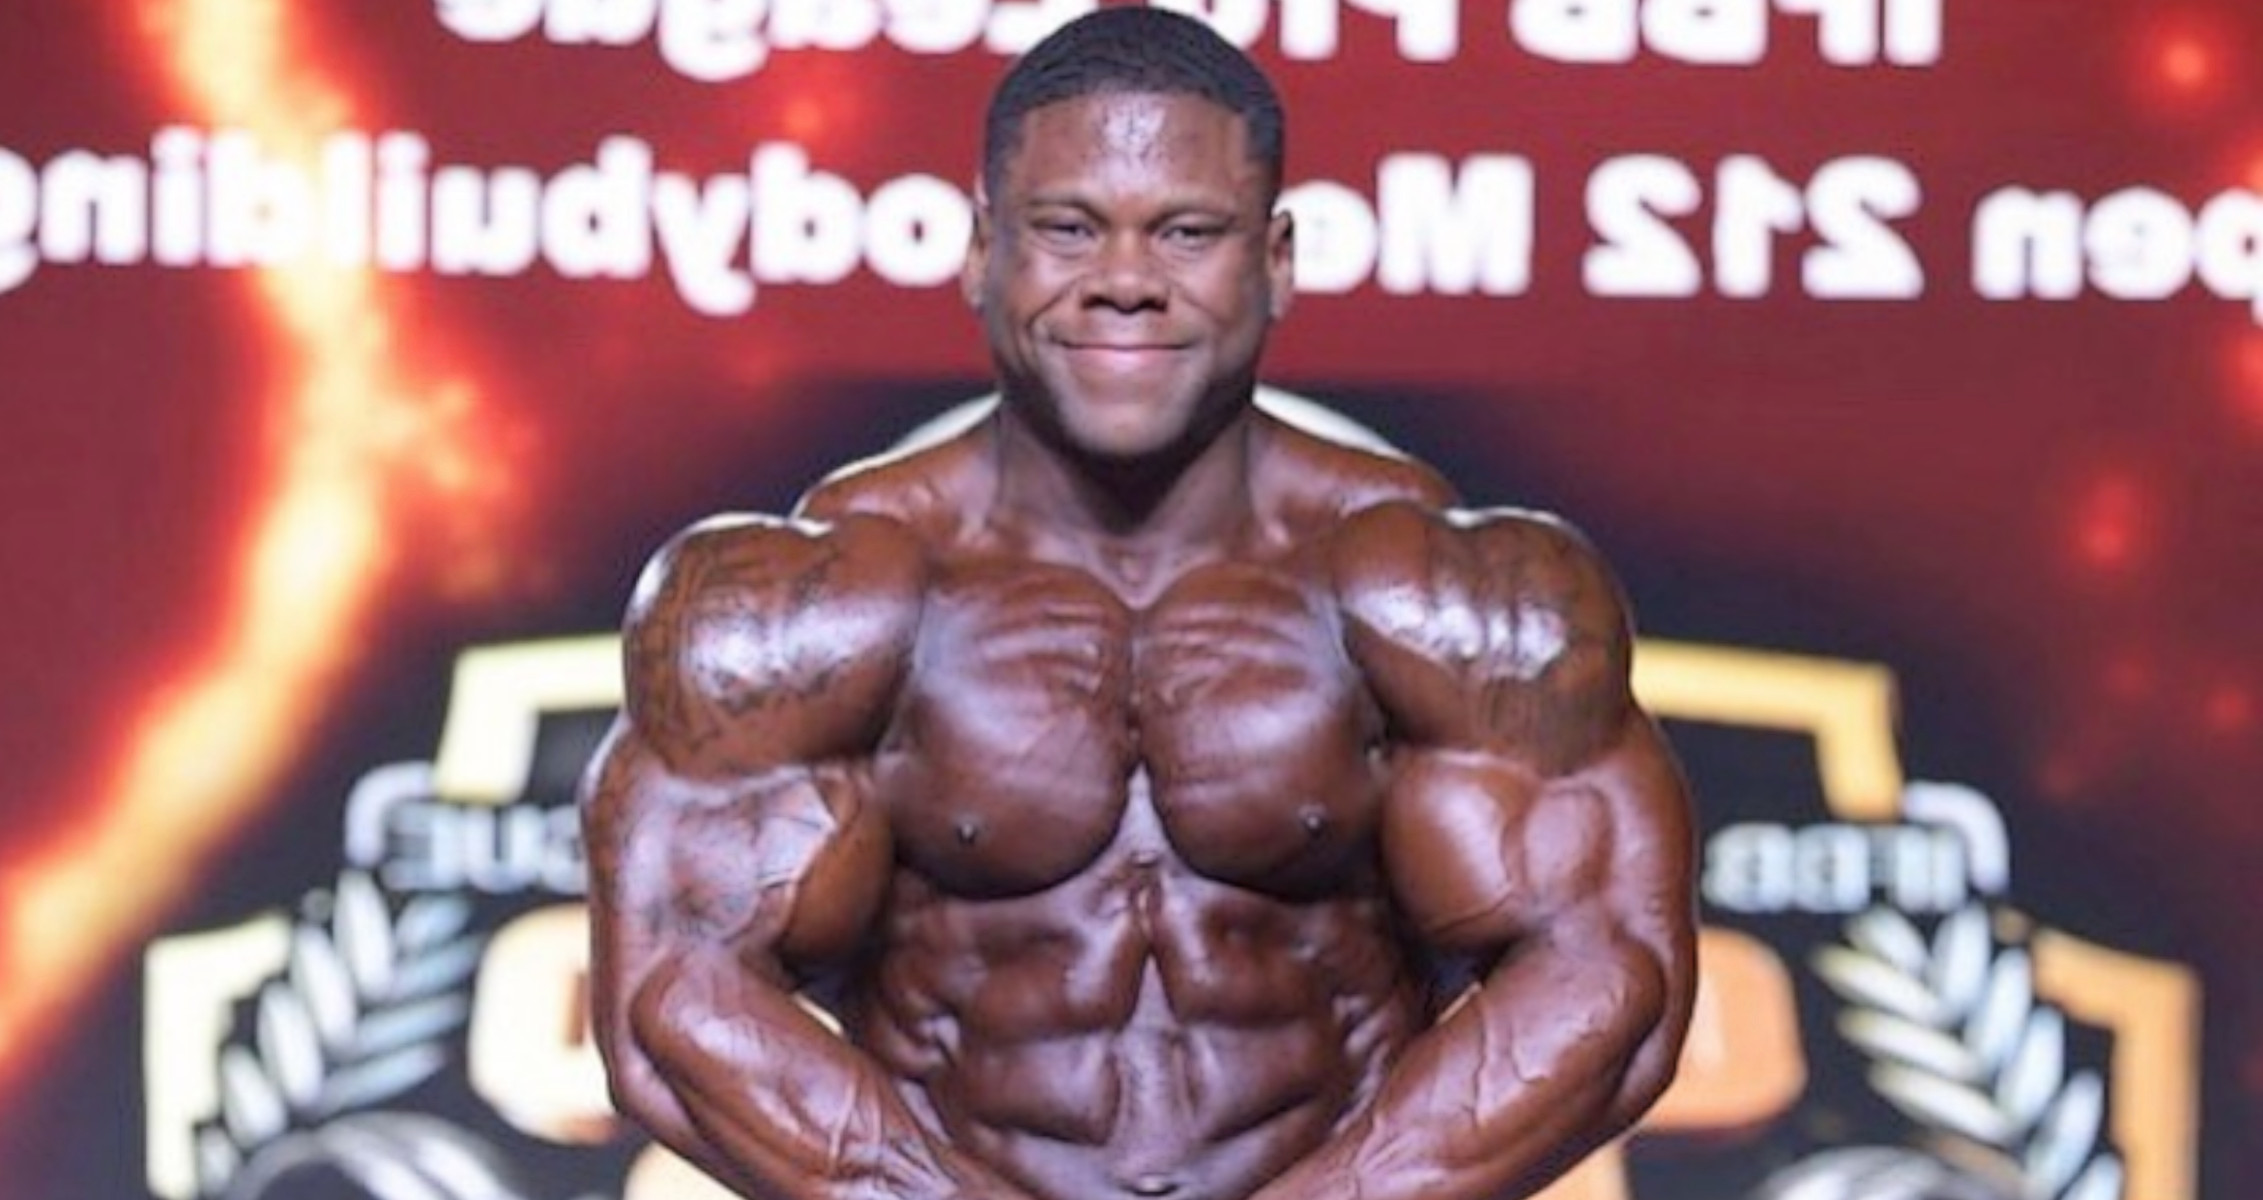 Keone Pearson to Sit Out the 2020 Olympia